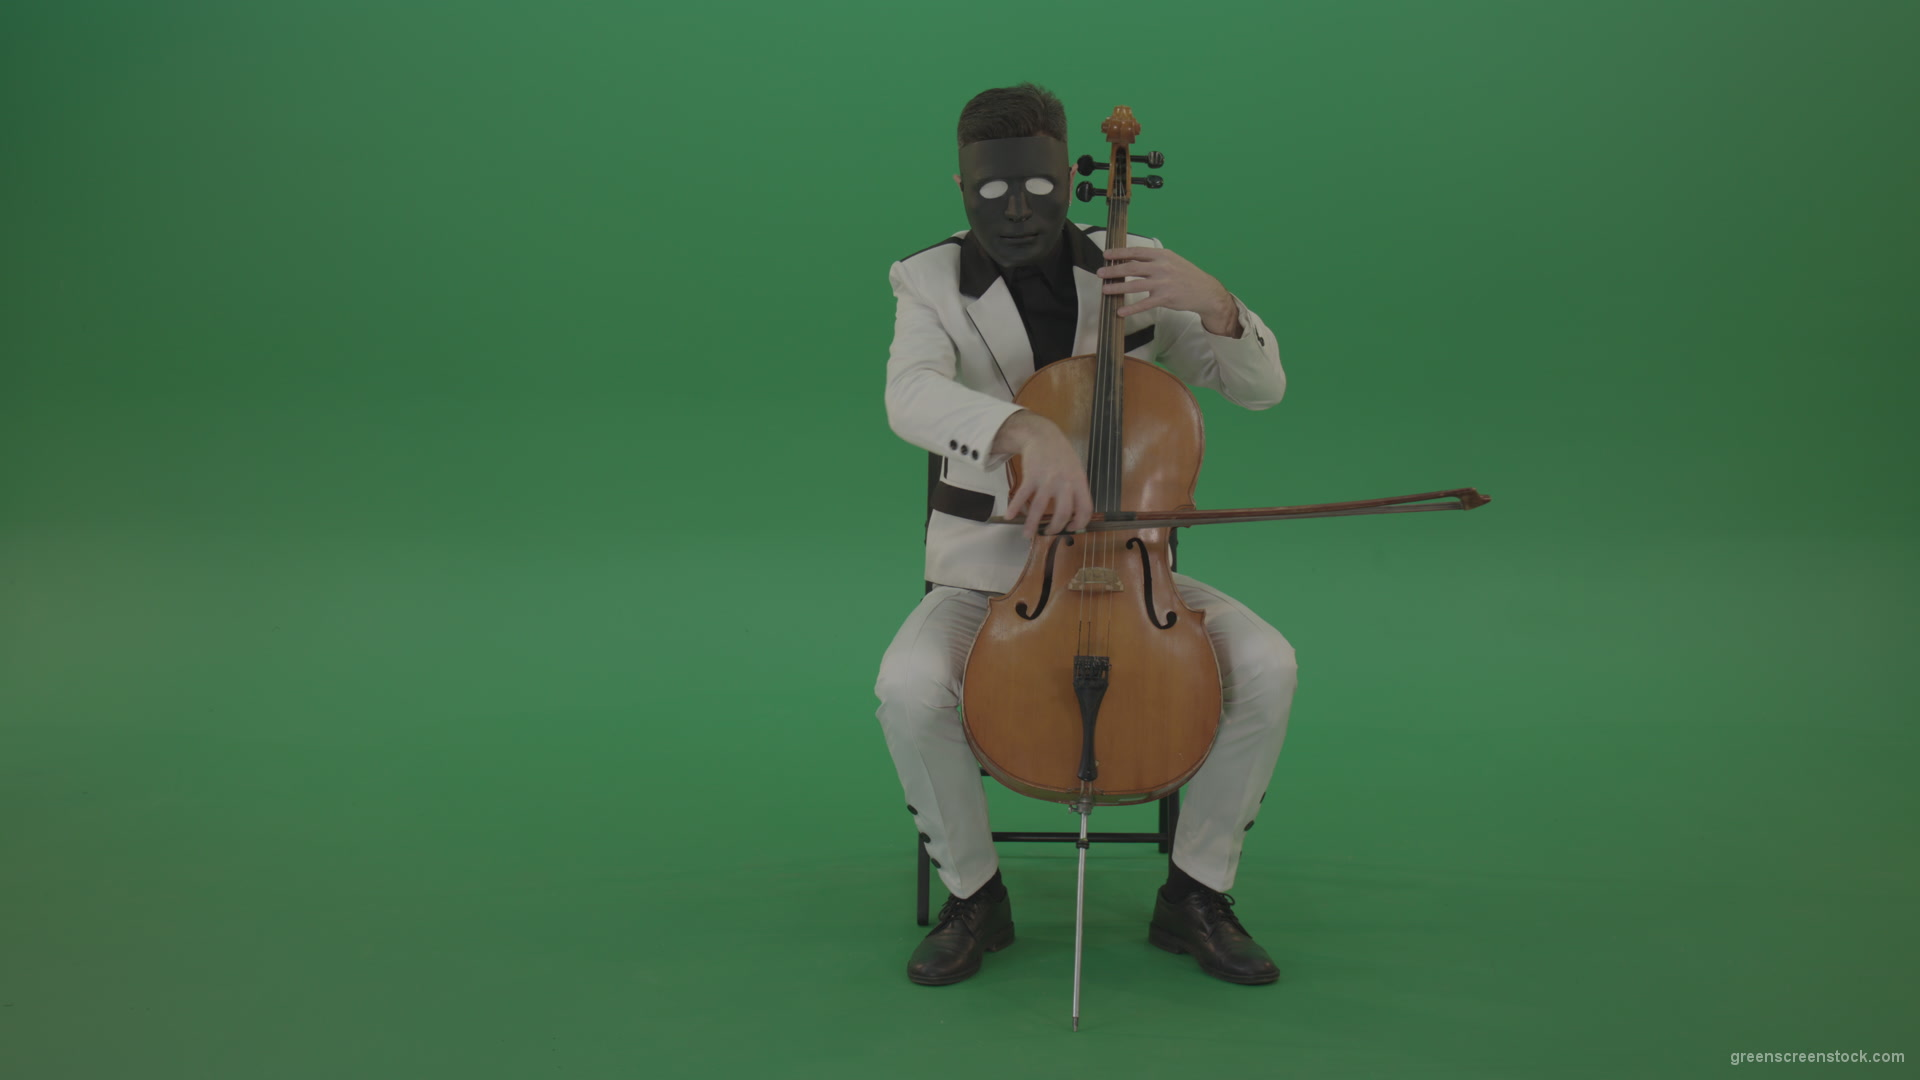 Man-plays-on-a-cello-in-a-white-suit-and-a-black-mask-with-white-eyes_001 Green Screen Stock